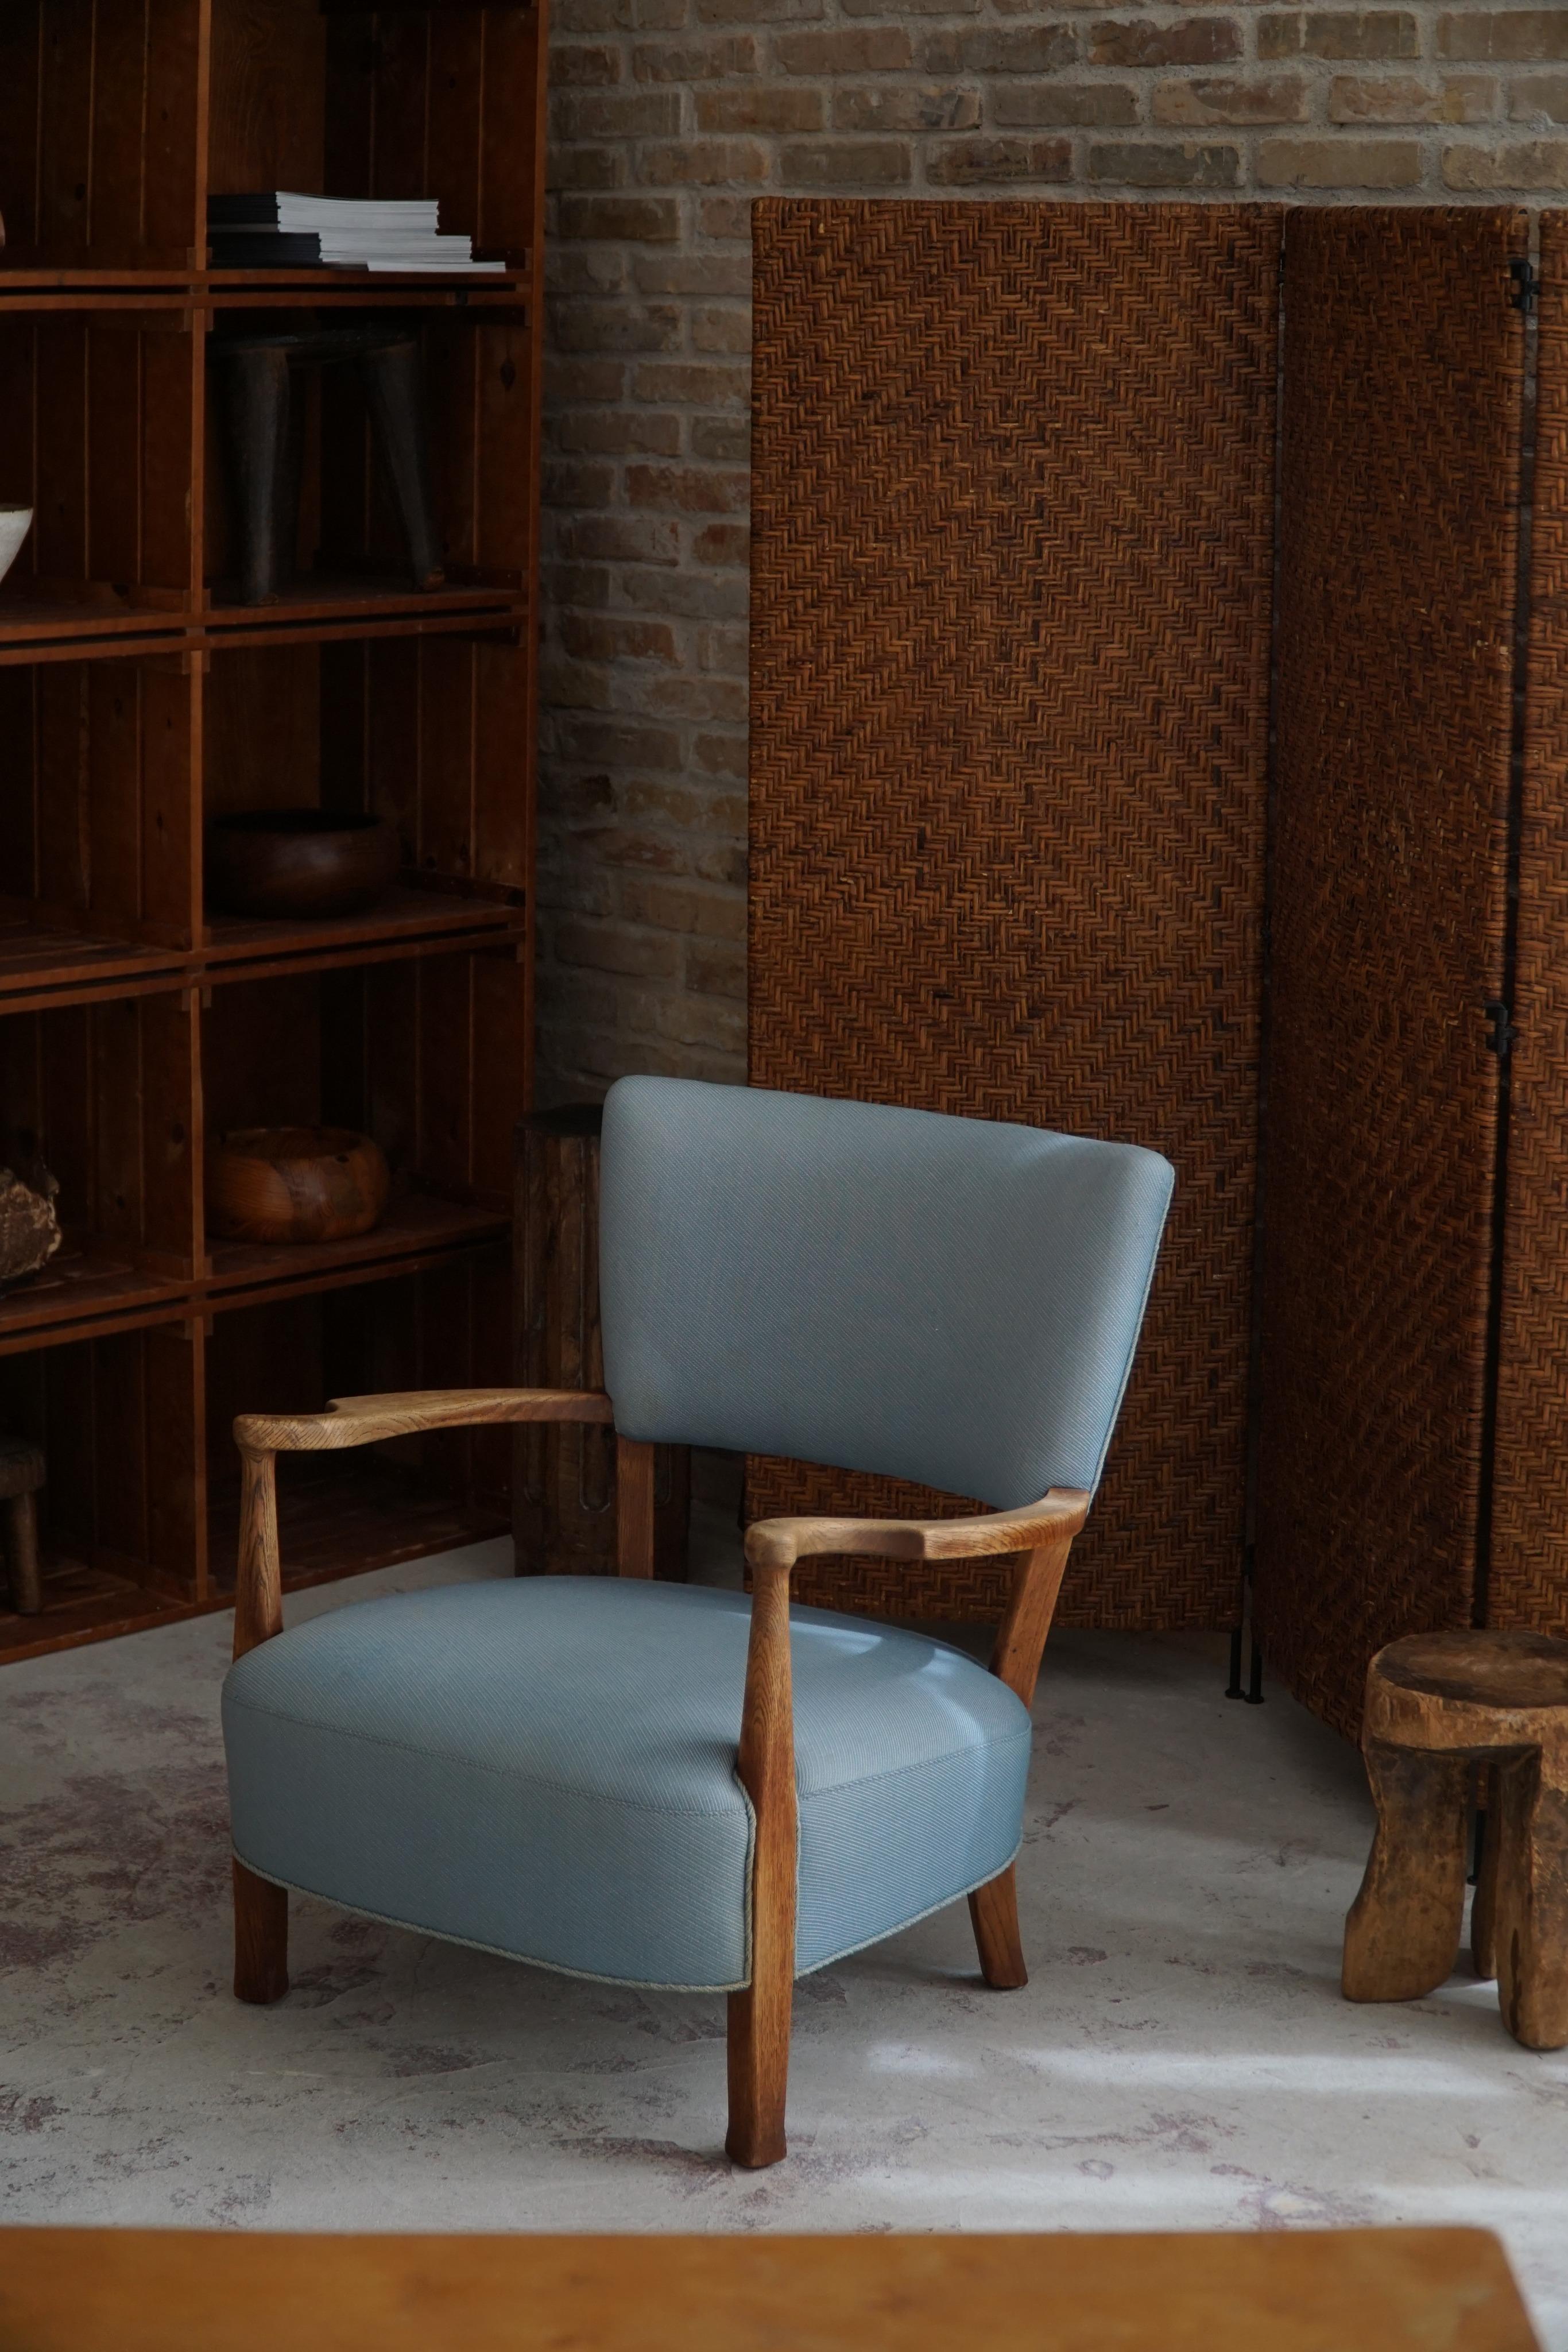 Elevate your interior space with this Danish Modern masterpiece - an exceptional curved lounge chair in oak attributed to the renowned designer Viggo Boesen. Crafted during the 1950s, this chair is an example of the era's innovative design,